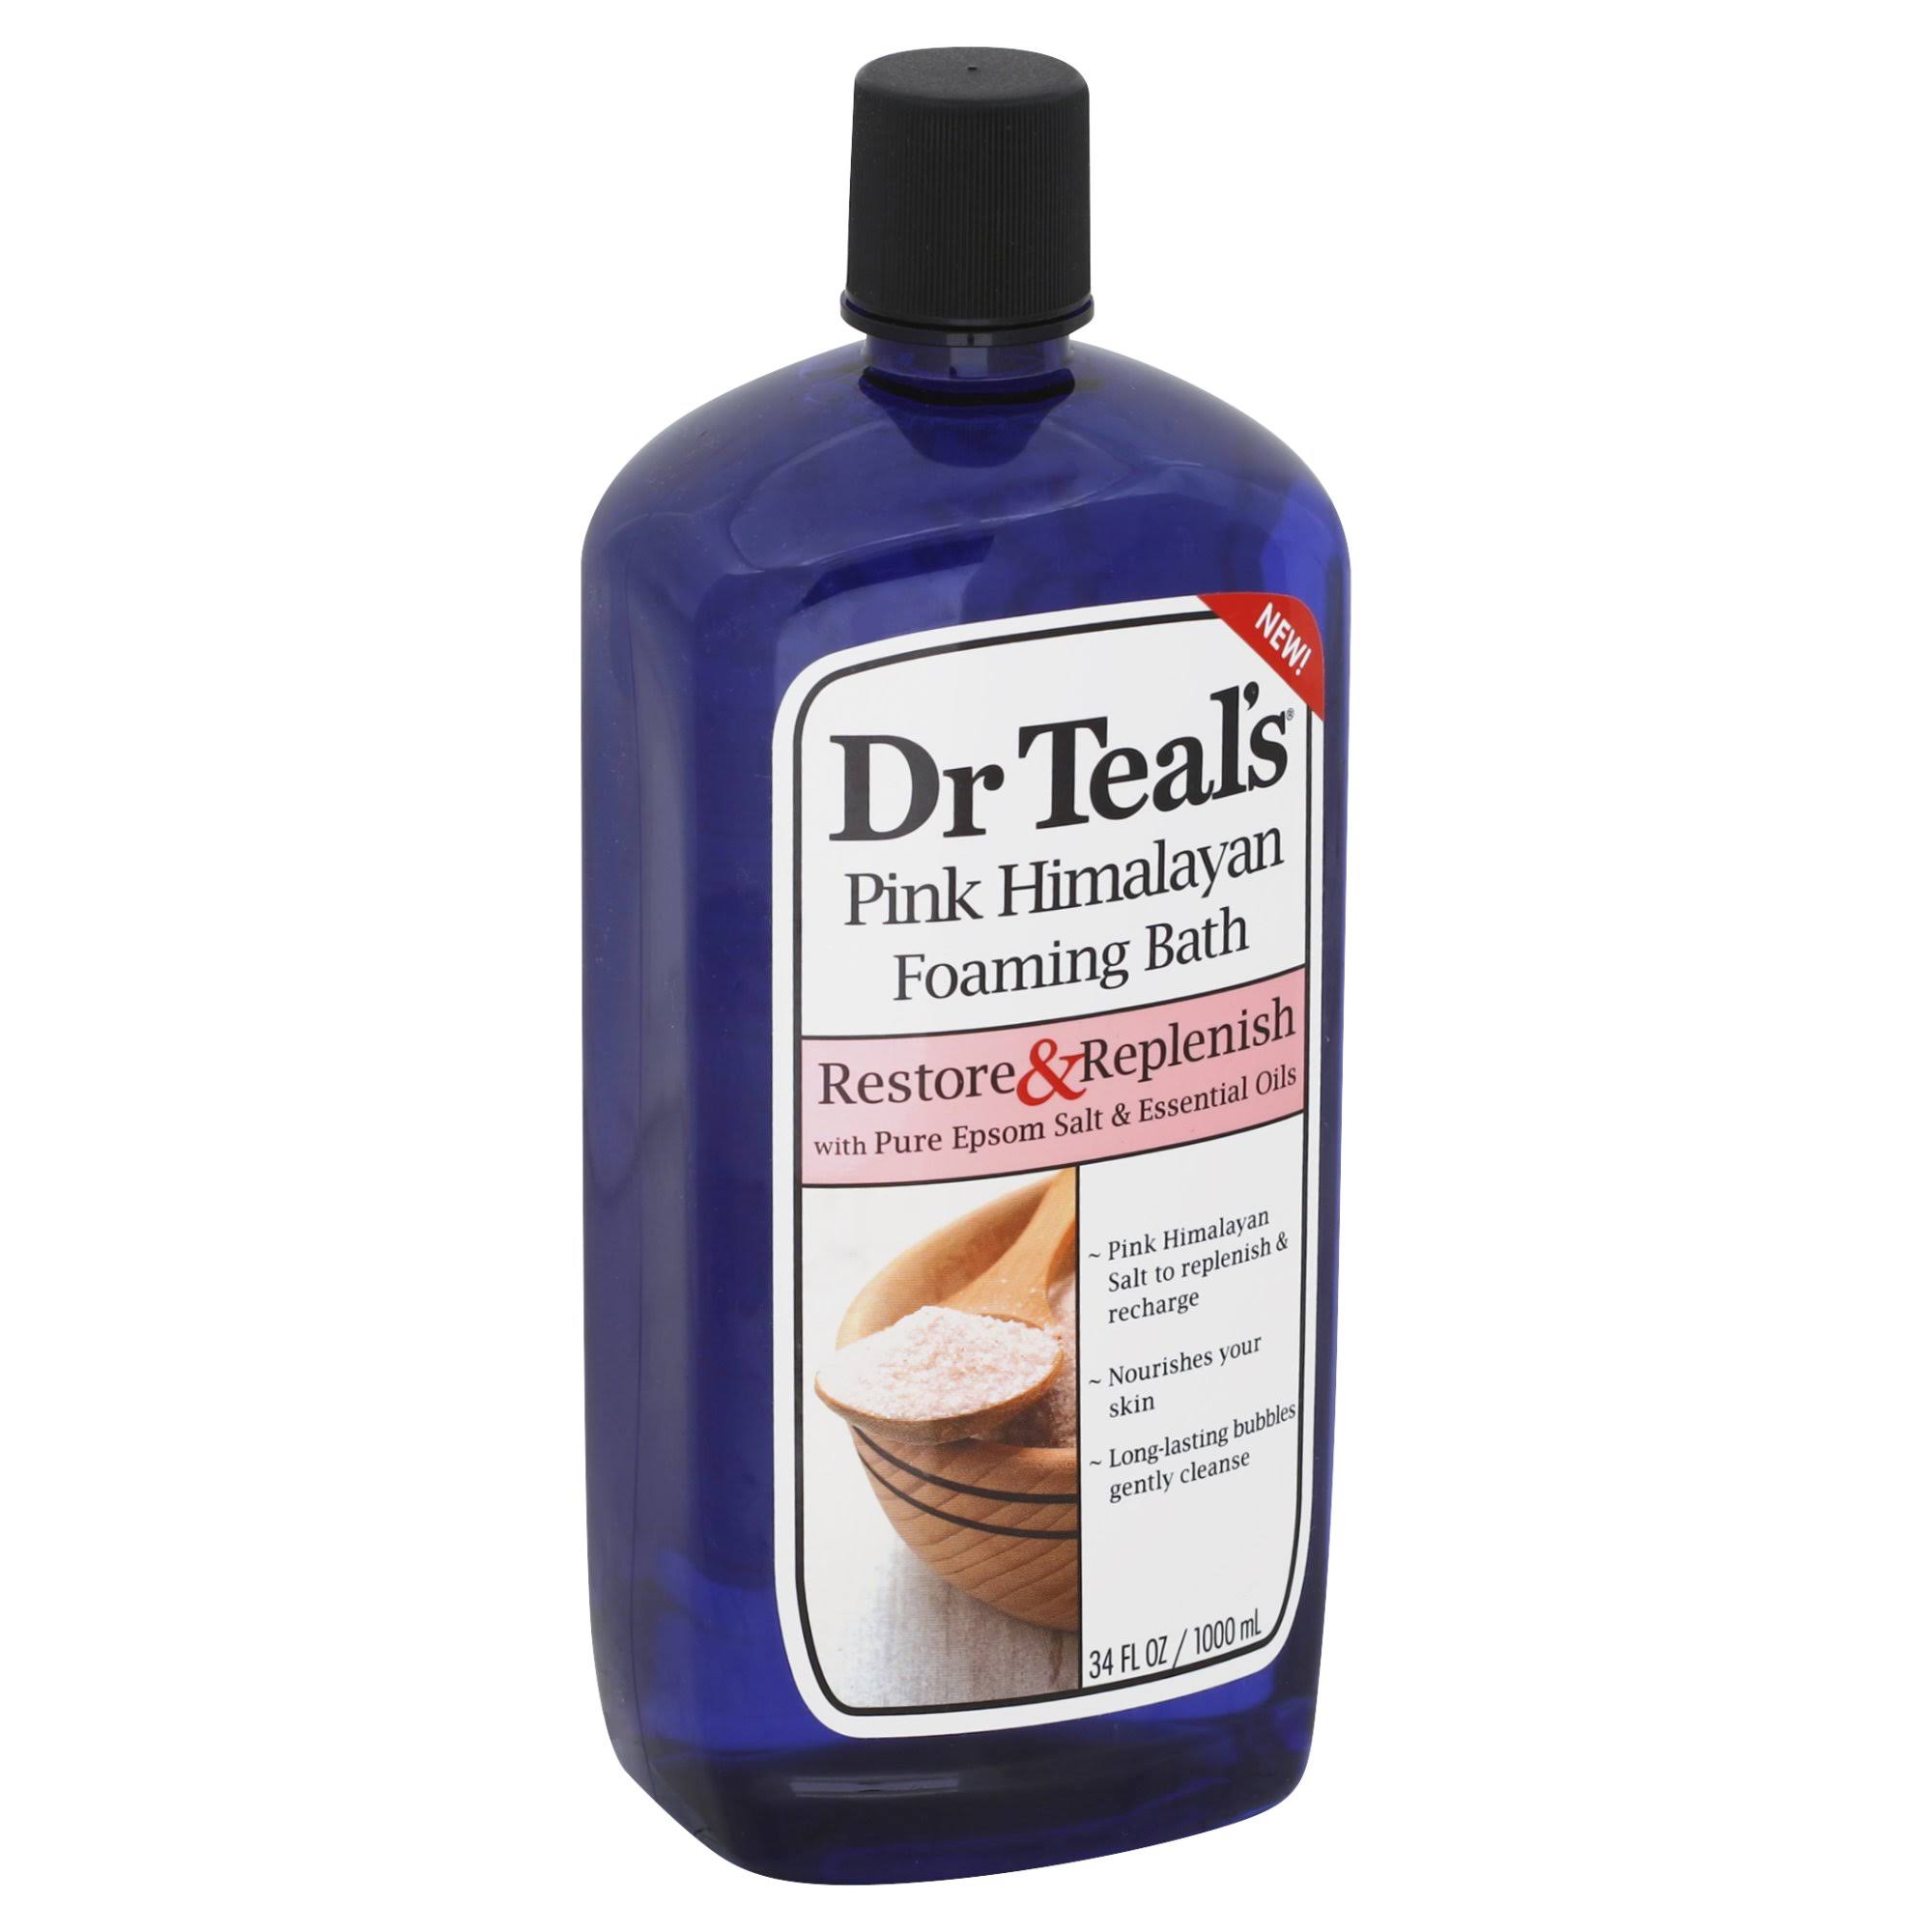 Dr Teal's Restore and Replenish Pink Himalayan Foaming Bath - 34oz